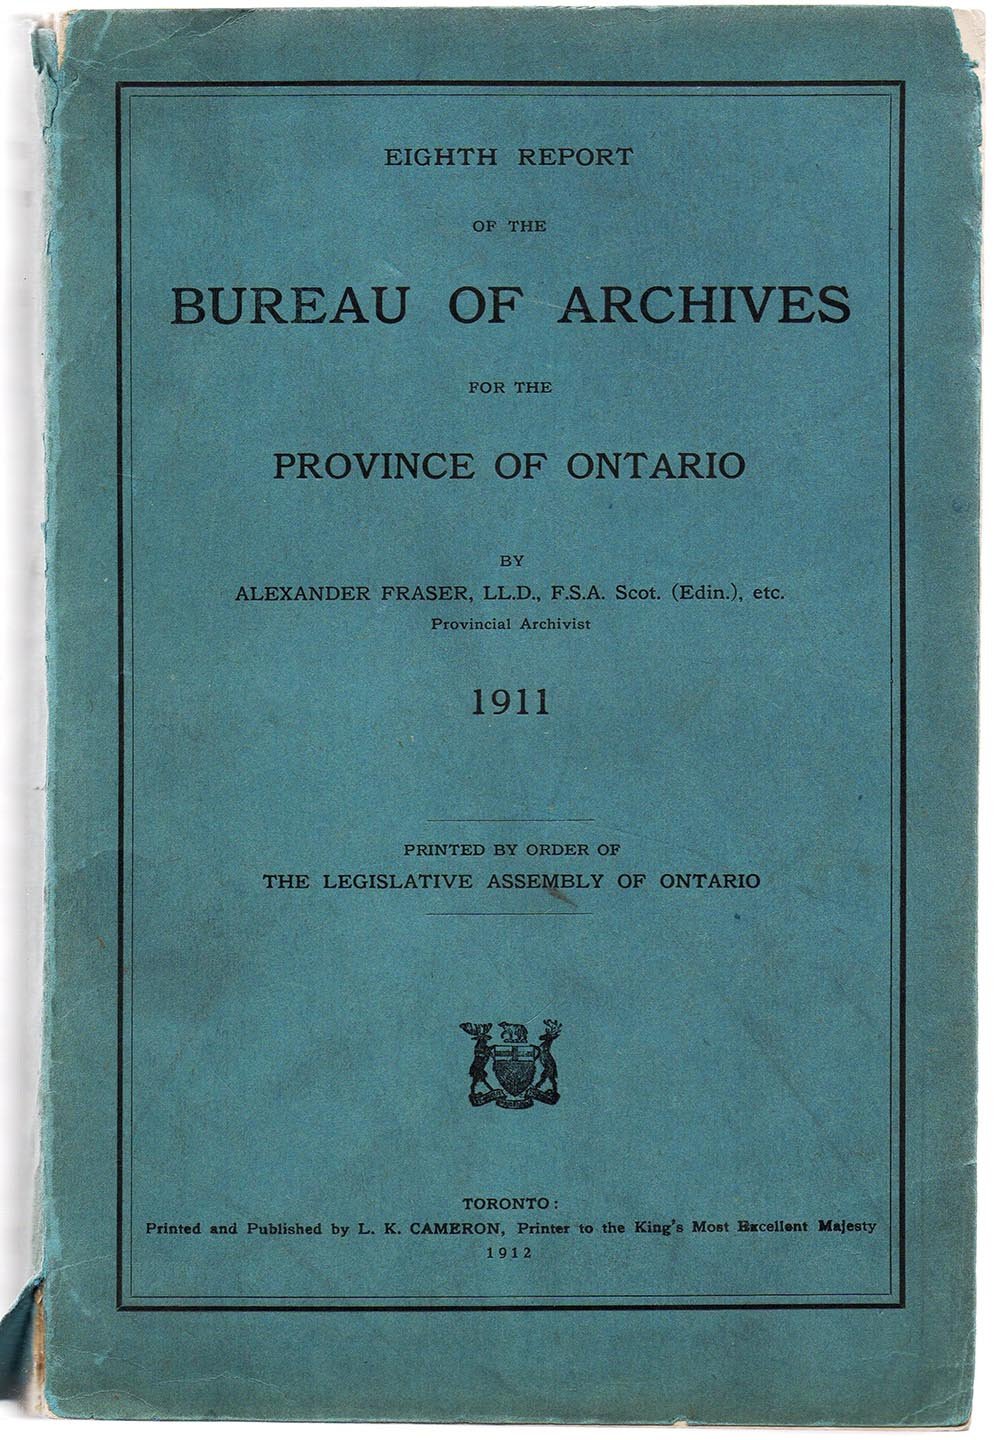 Eighth Report of the Bureau of Archives for the Province of Ontario 1911